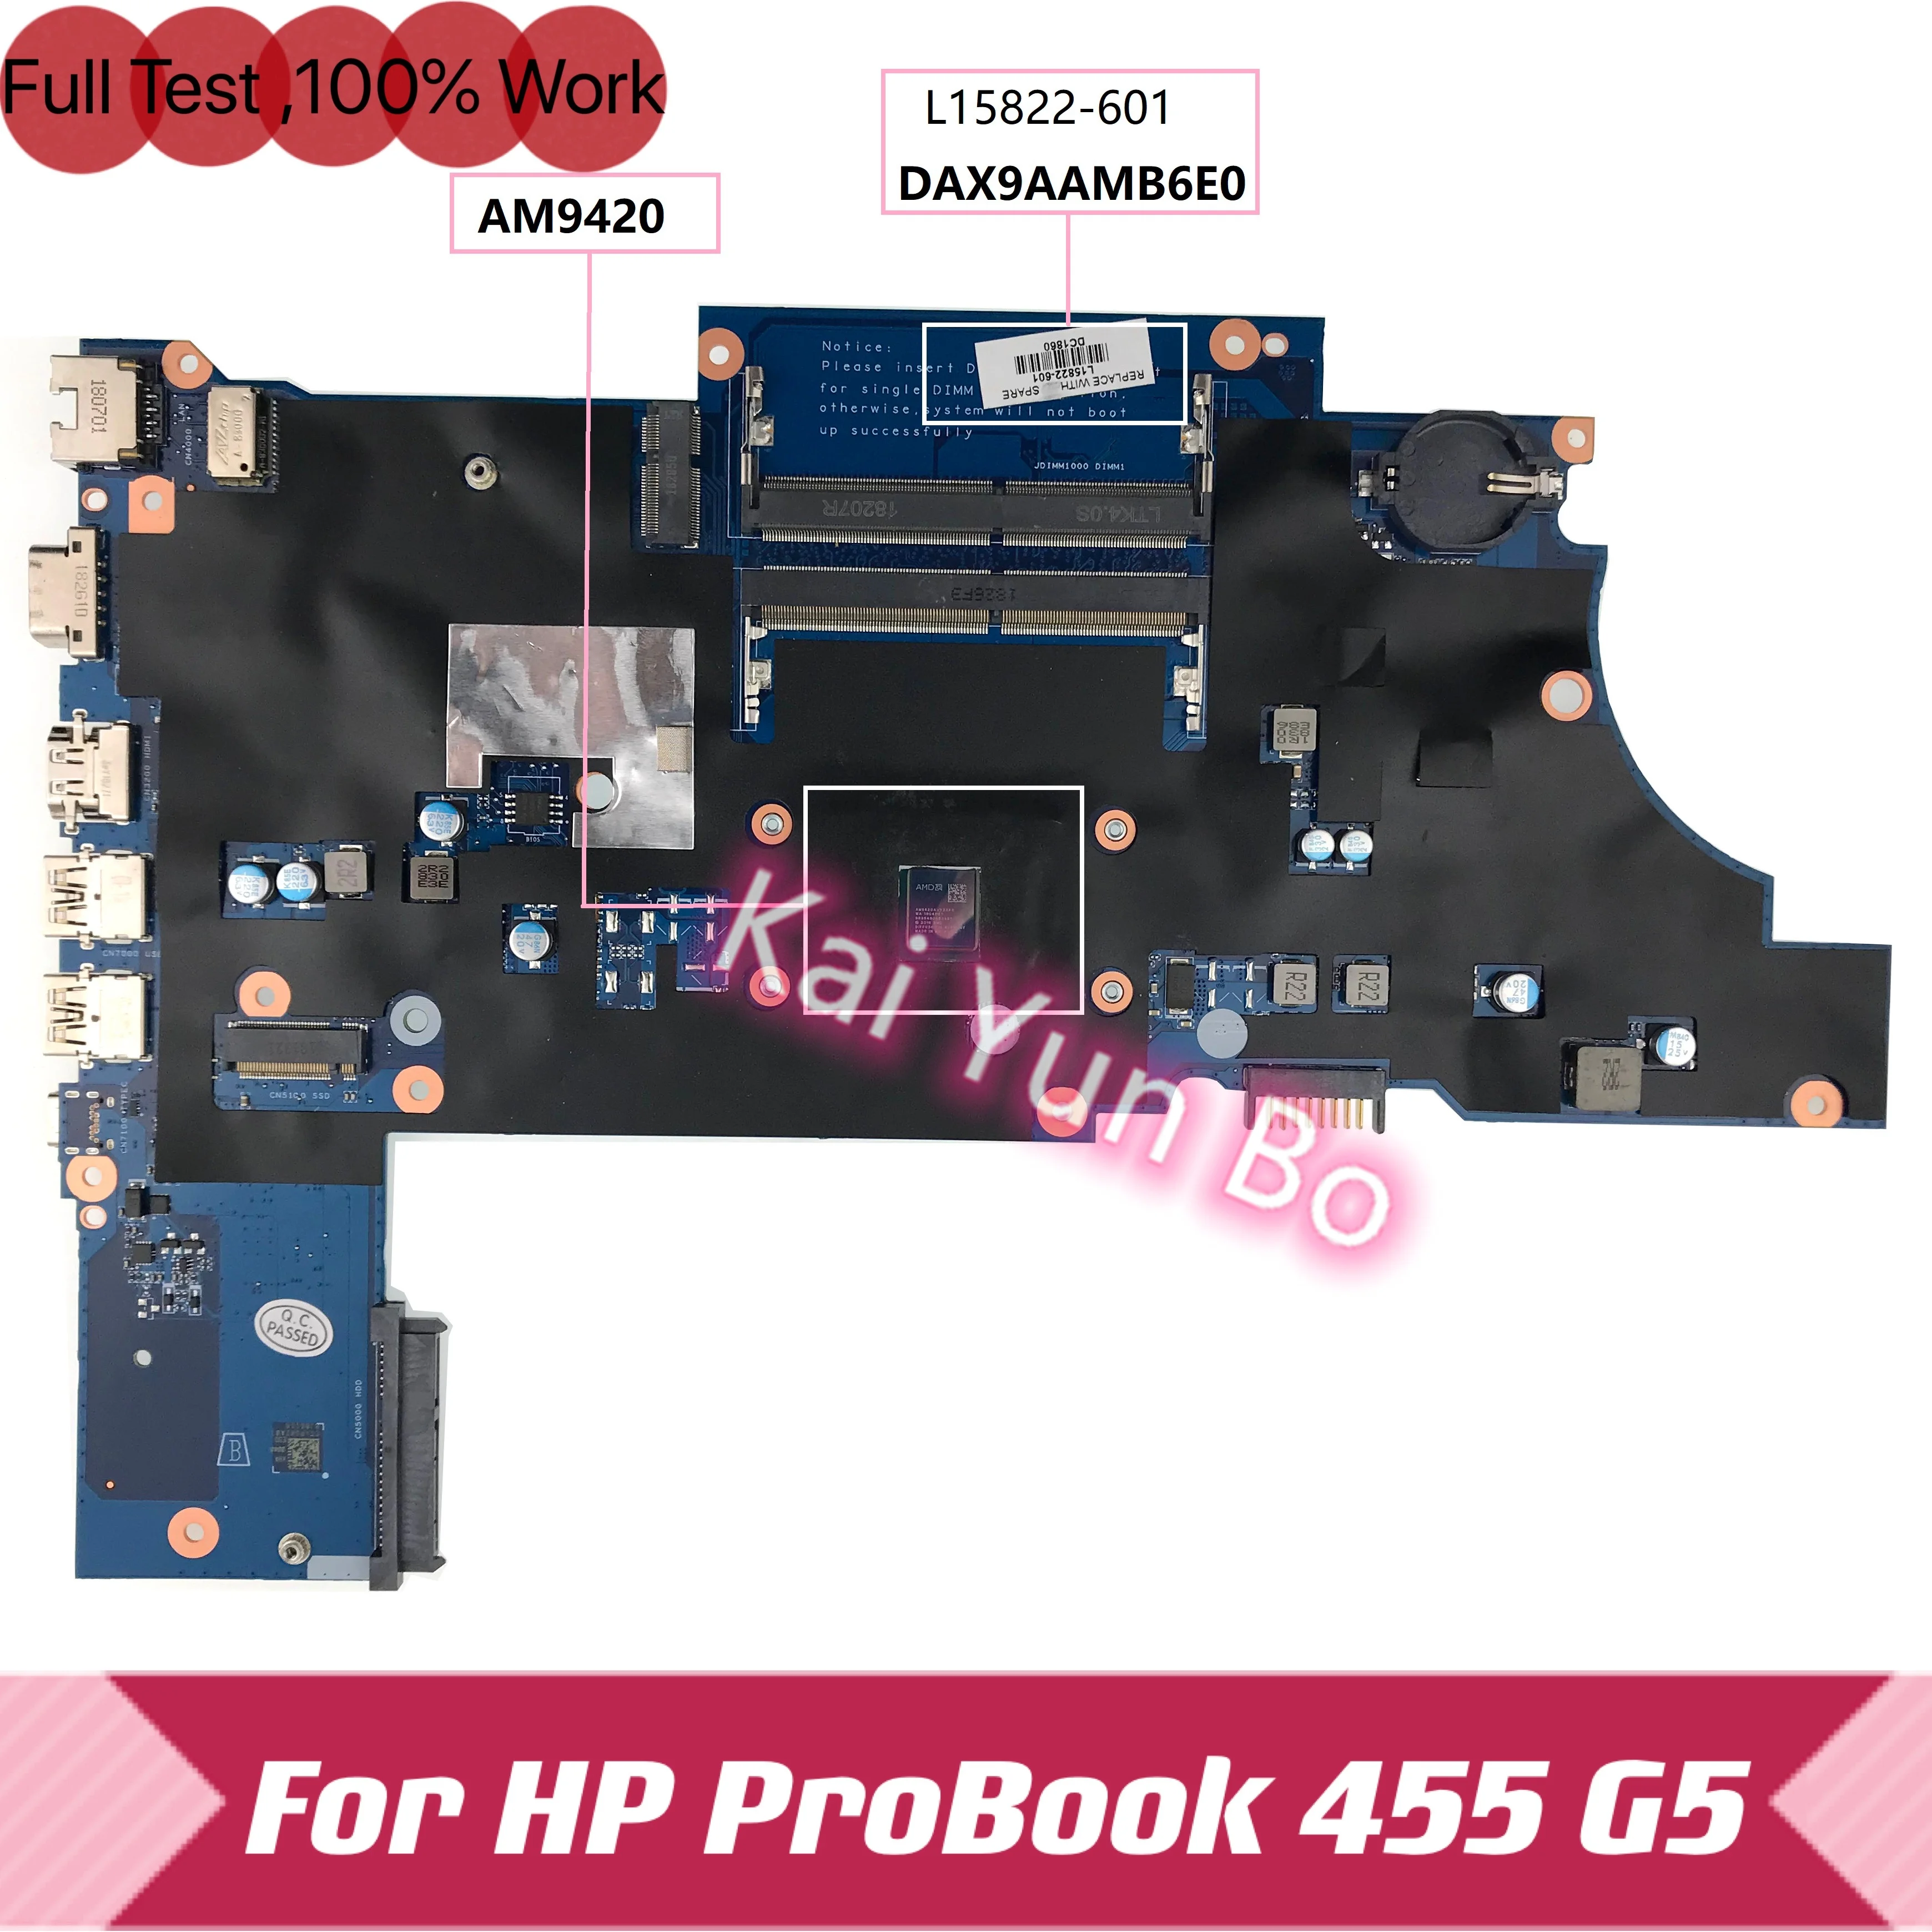 

DAX9AAMB6E0 L15822-601 For HP ProBook 455 G5 Laptop Motherboard L15822-001 L15822-501 With A9-9420 CPU DDR4 100% Fully Tested